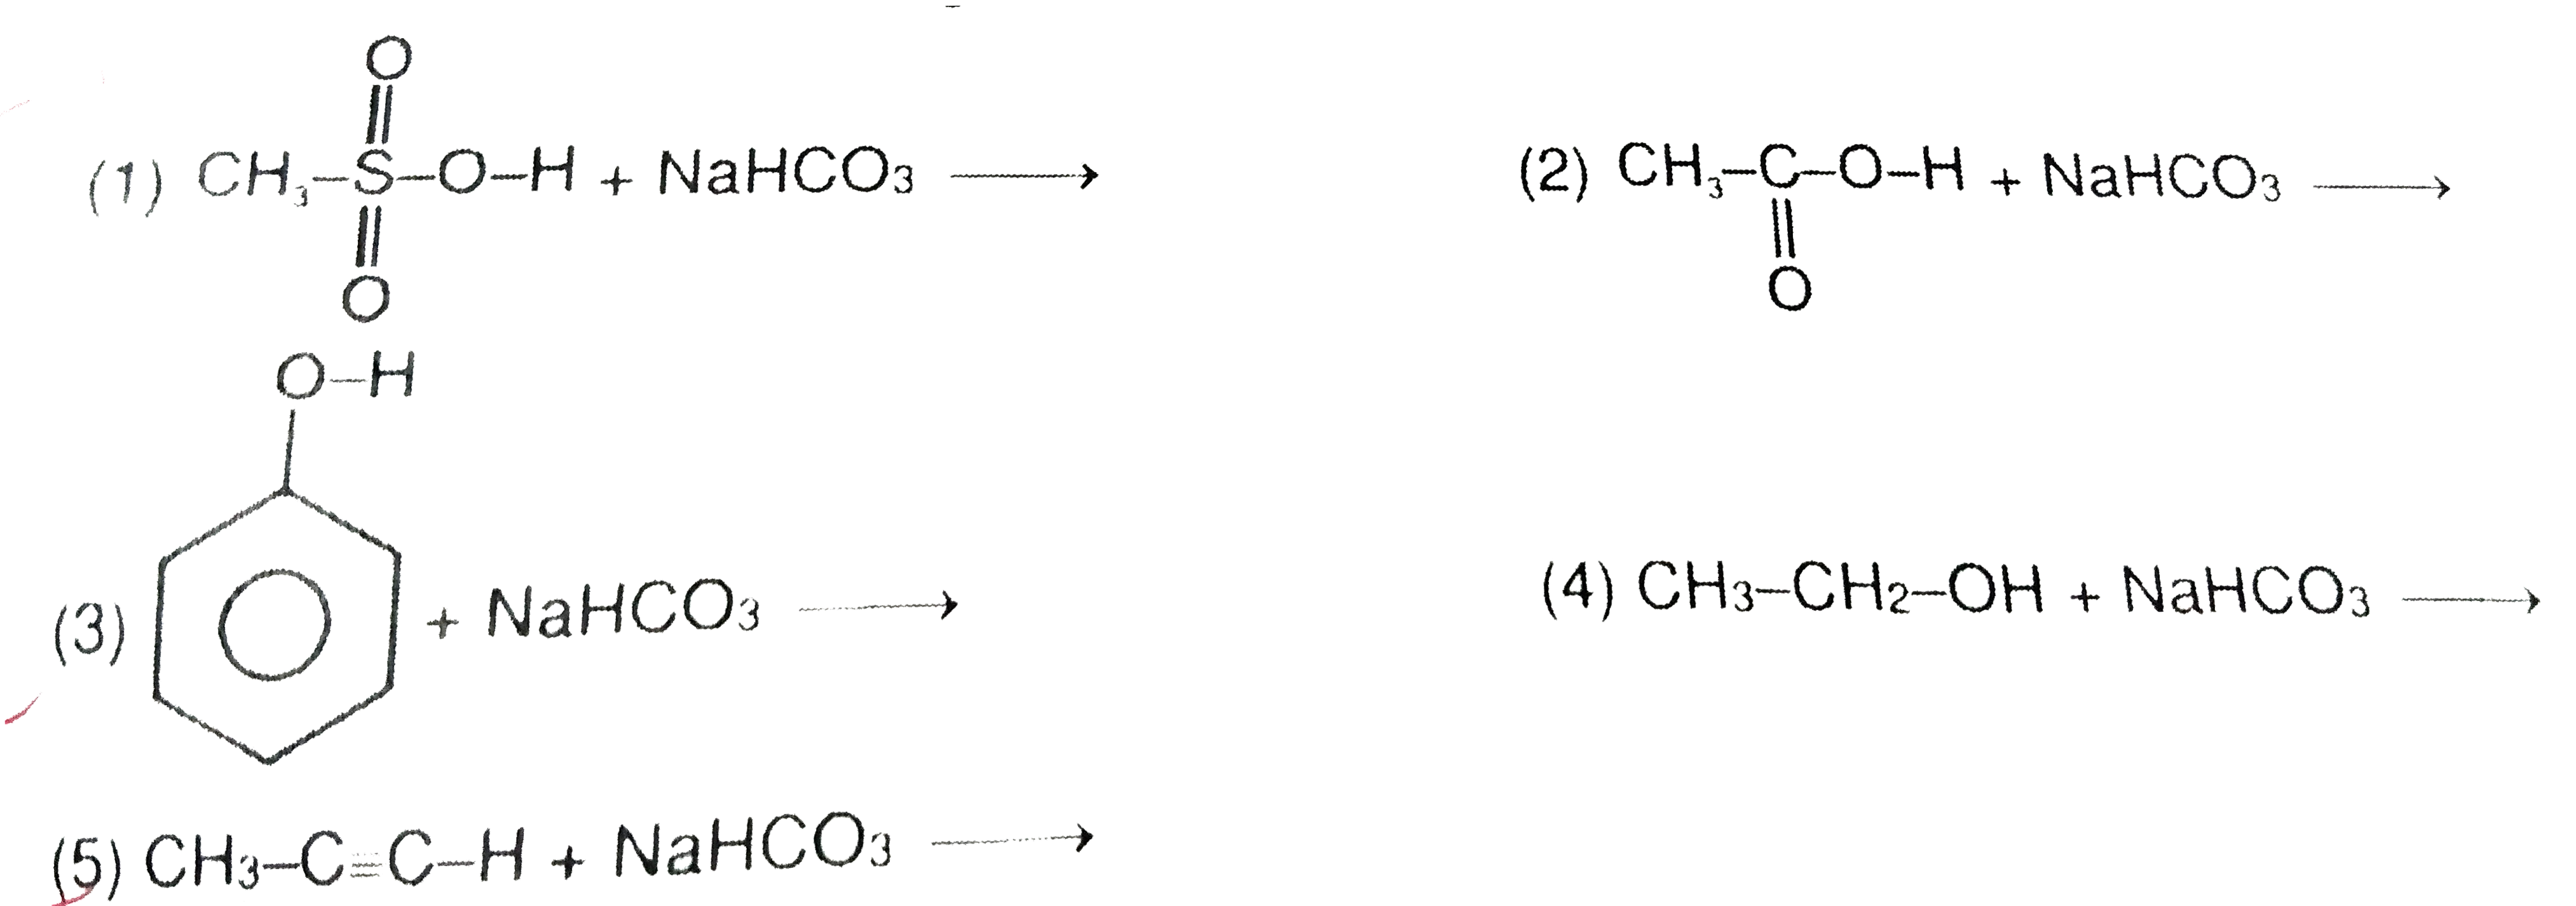 In how many reactions CO(2) gas is released out after reaction with NaHCO(3)